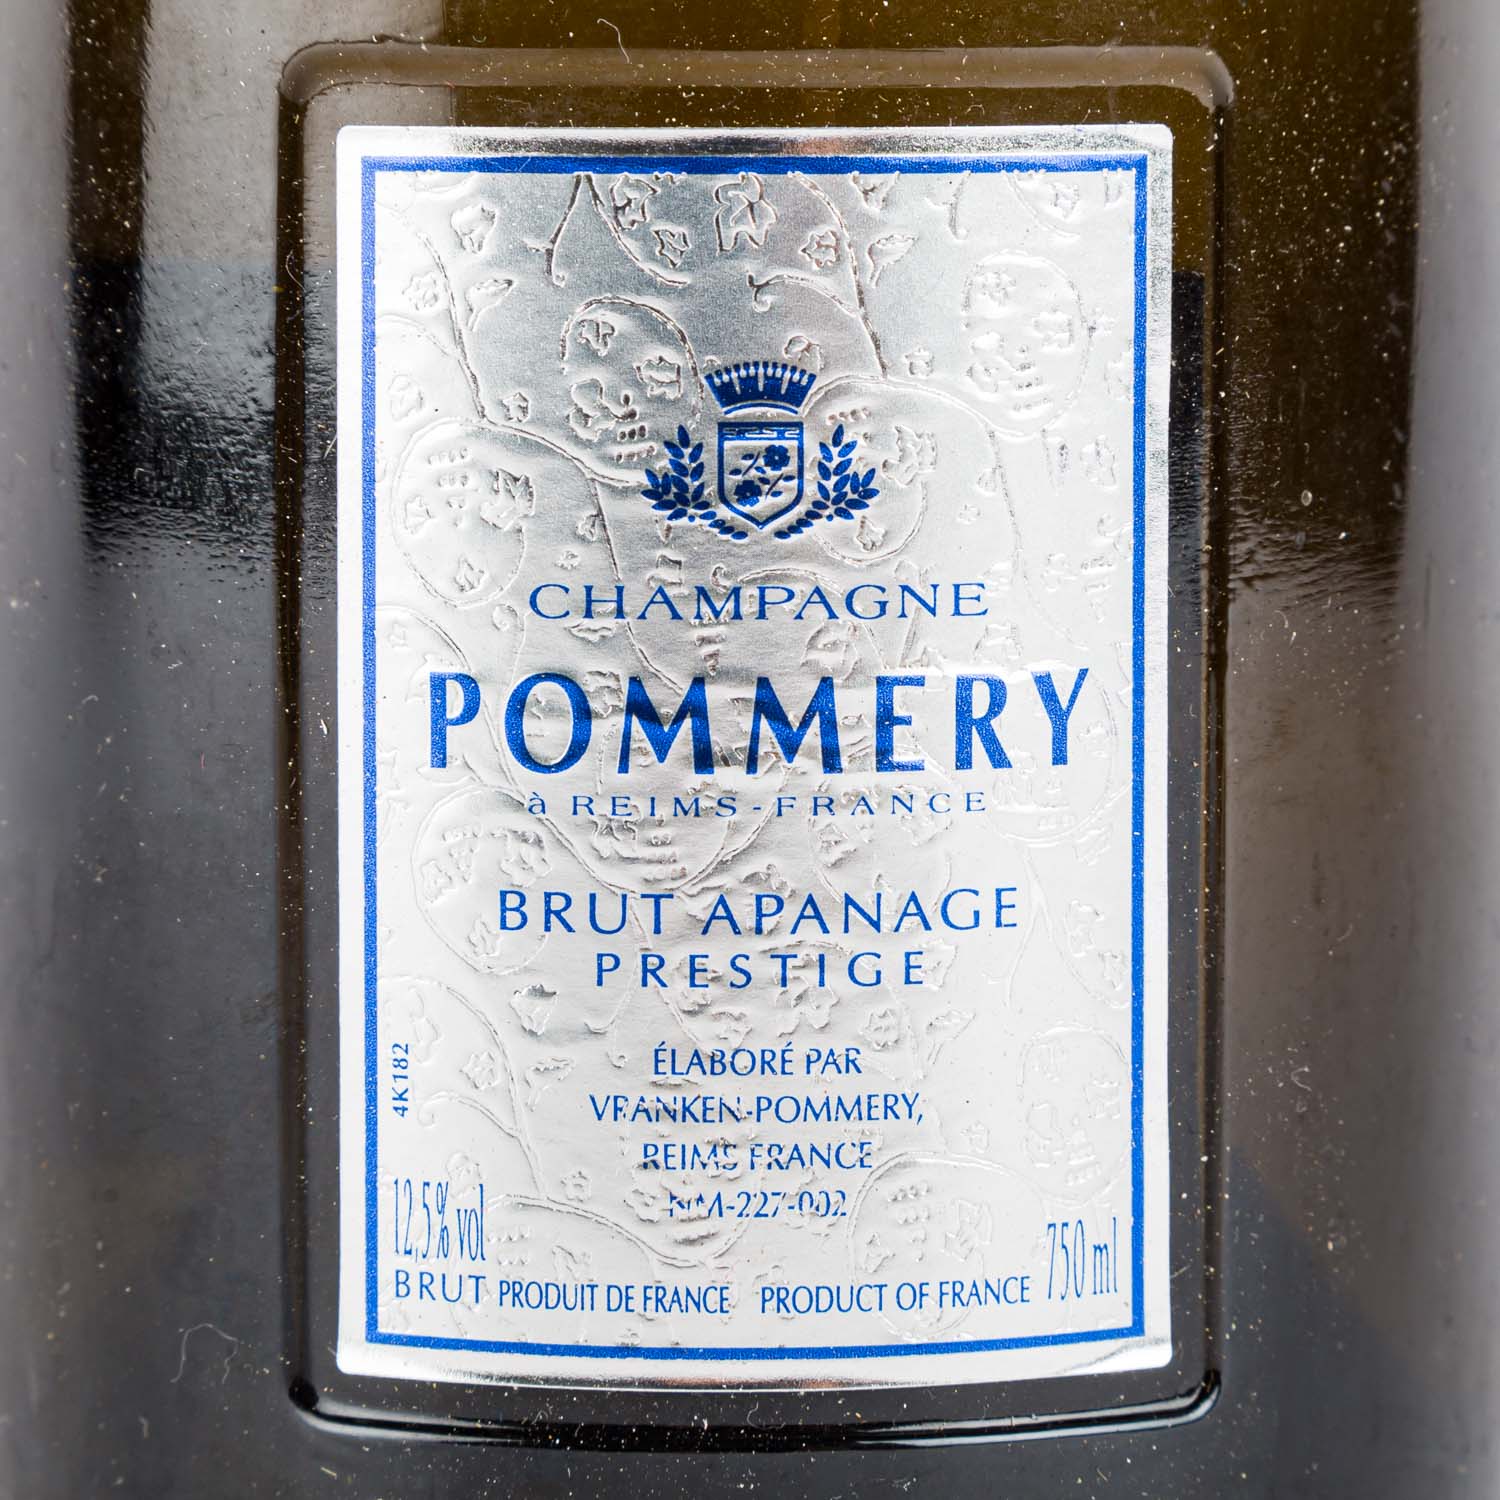 POMMERY 1 Flasche APANAGE PRESTIGE - Image 2 of 5